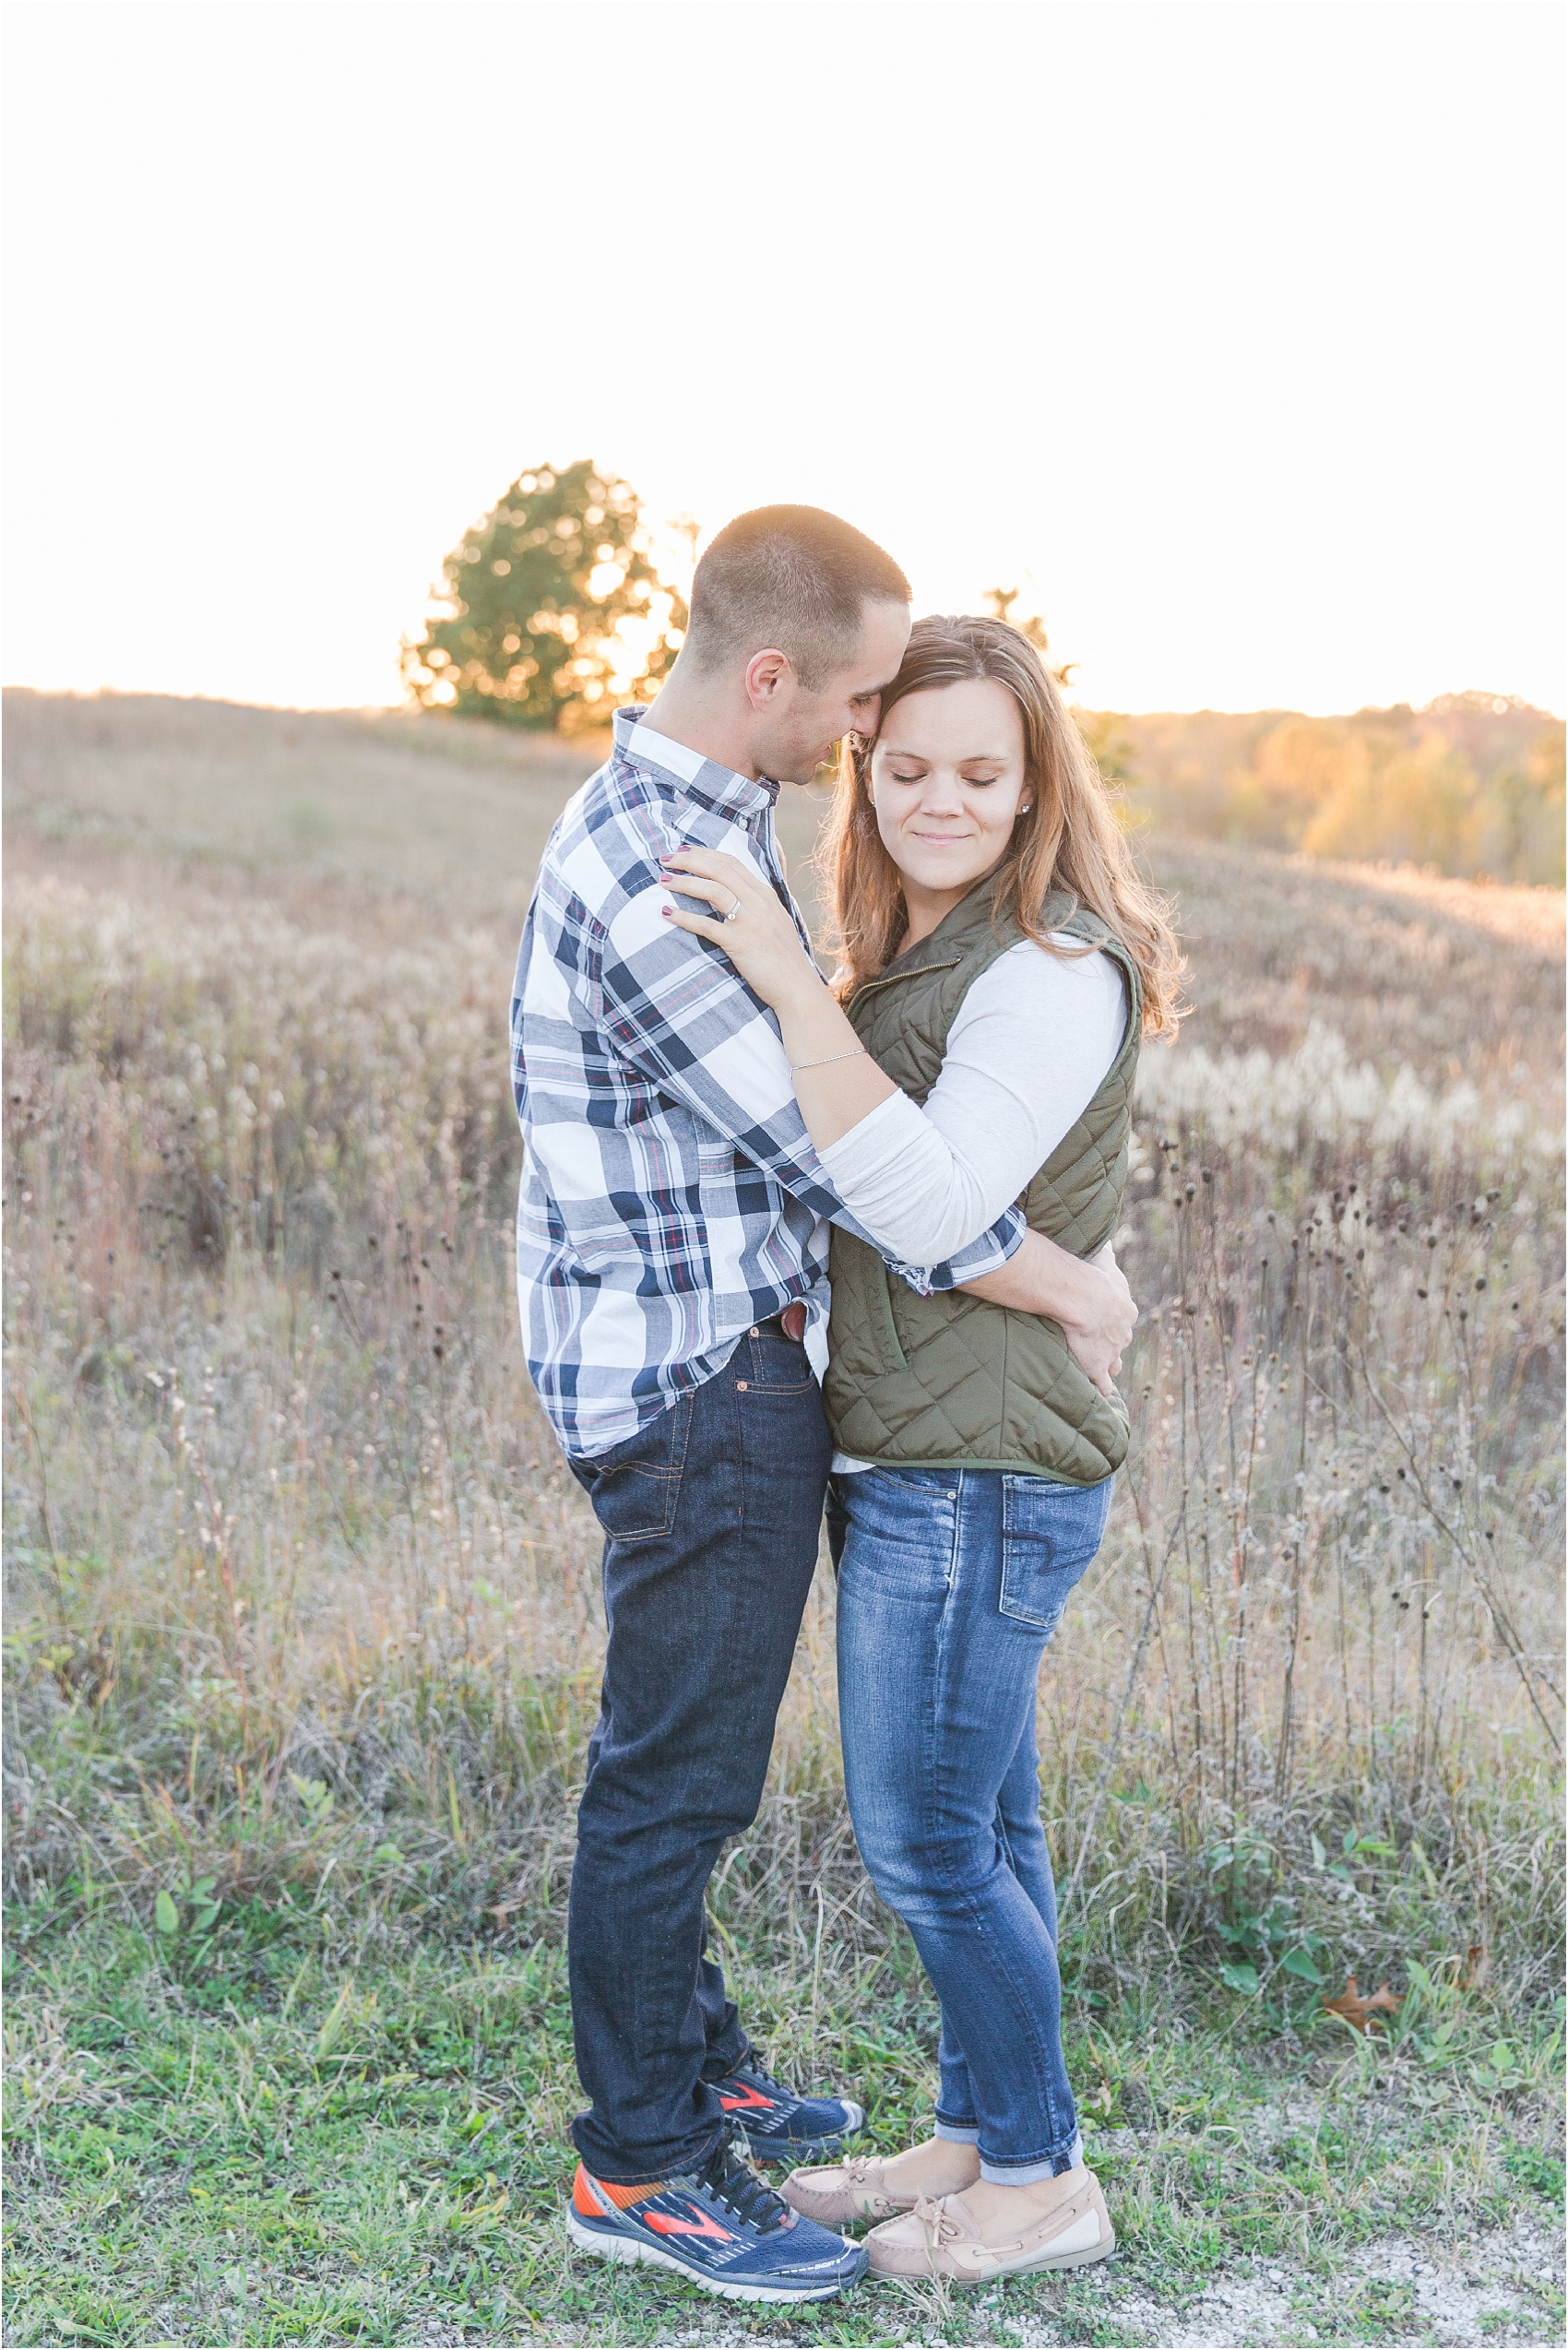 romantic-fall-engagement-photos-at-indian-springs-metropark-in-clarkston-mi-by-courtney-carolyn-photography_0027.jpg